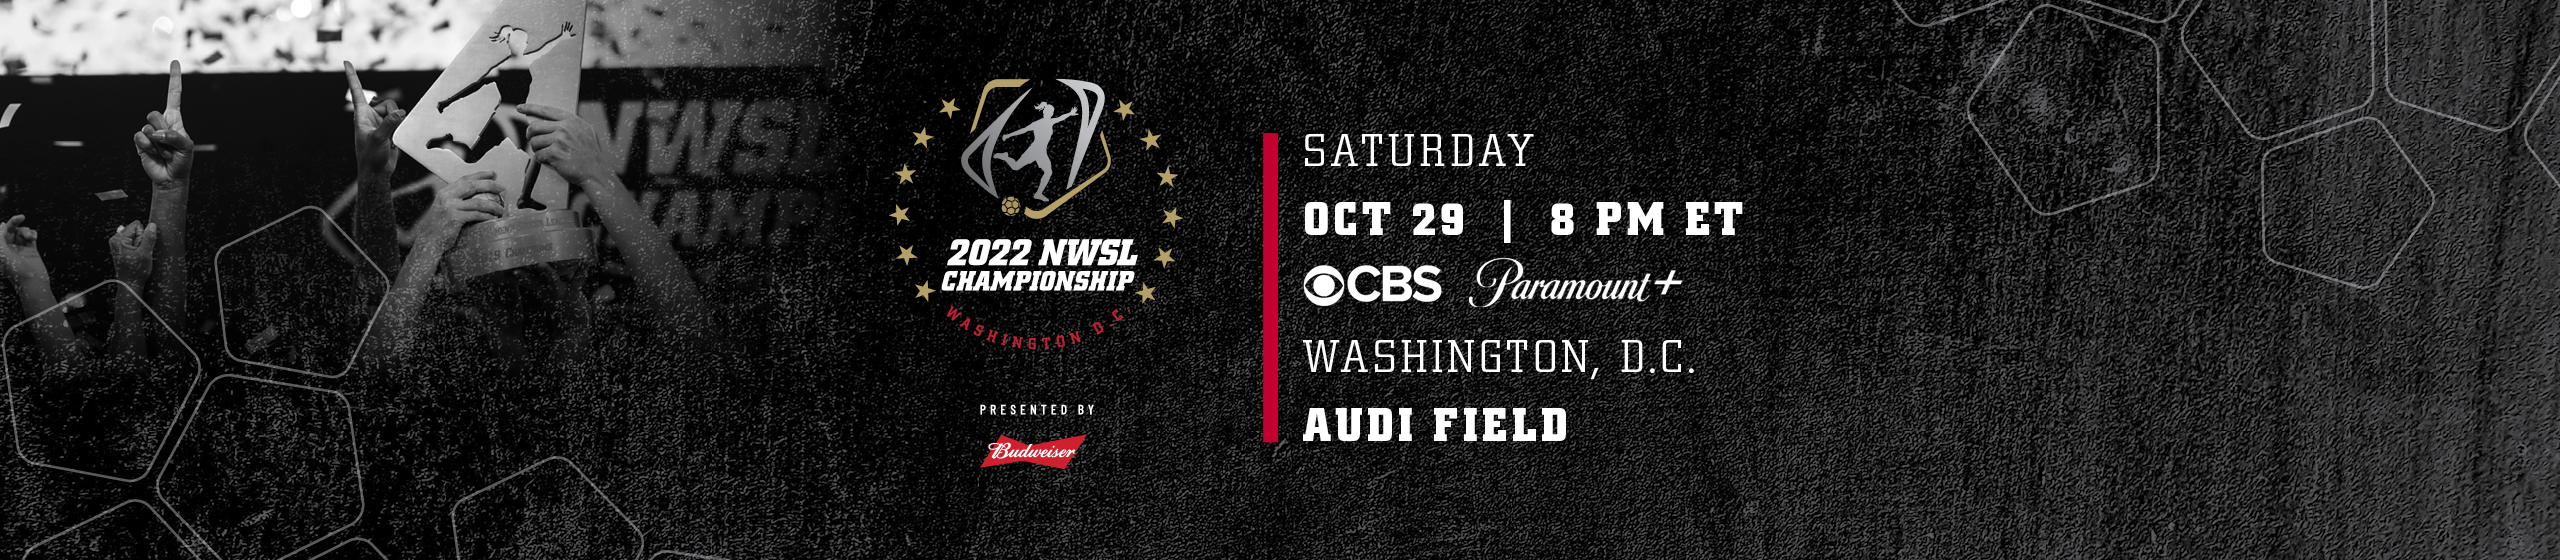 NWSL Championship Presented by Budweiser. Hosted at Audi Field in Washington, D.C.